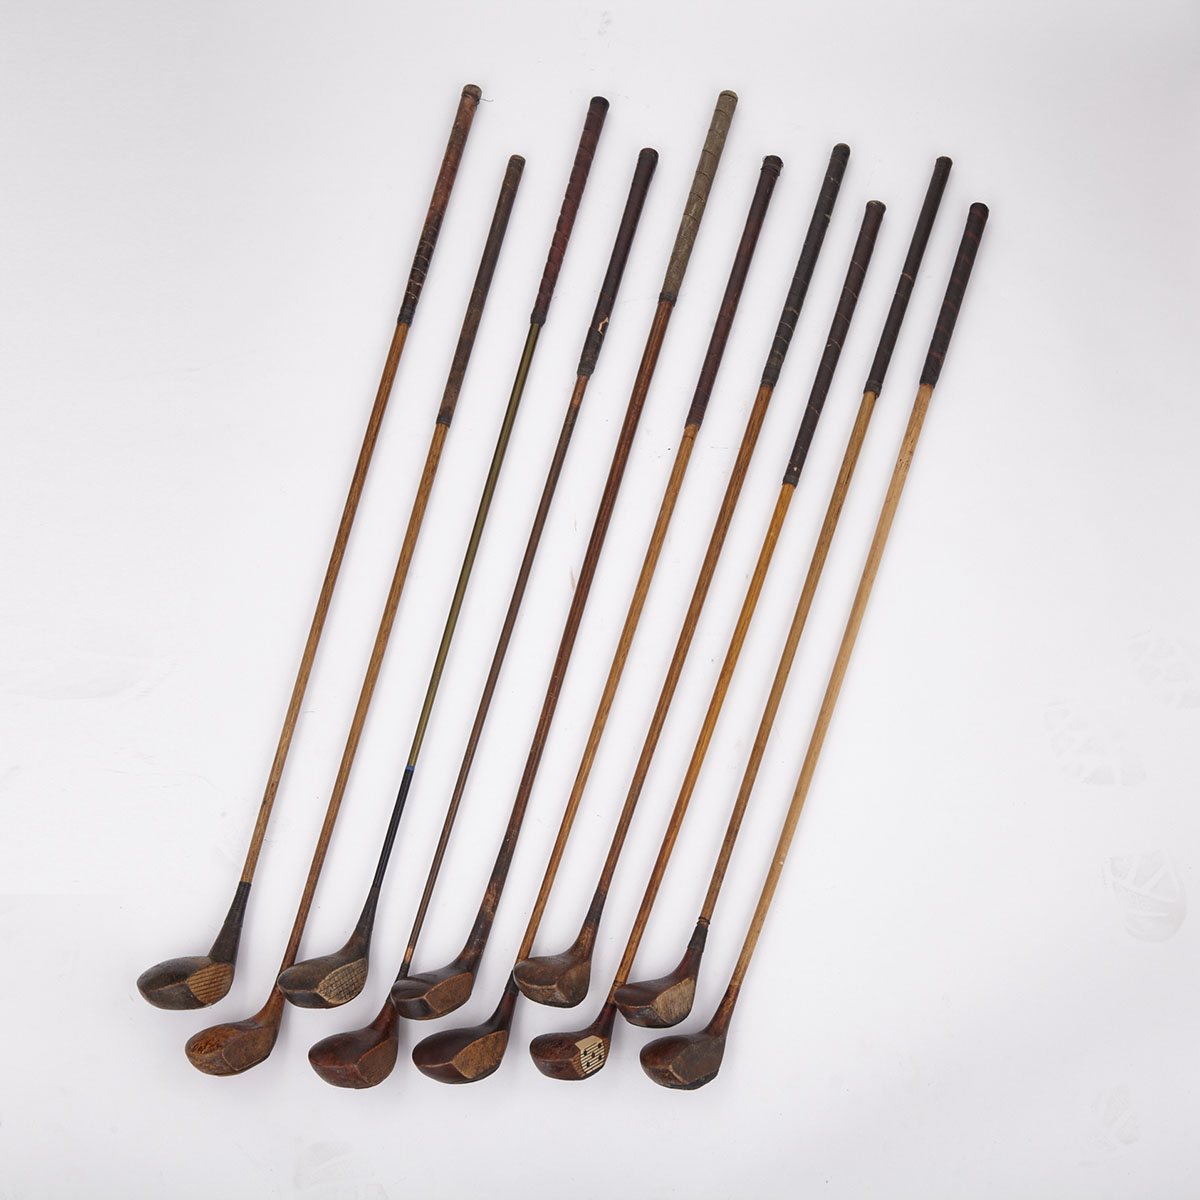 [Golf Clubs] Collection of Ten Scottish Wood Drivers, 19th/early 20th centuries